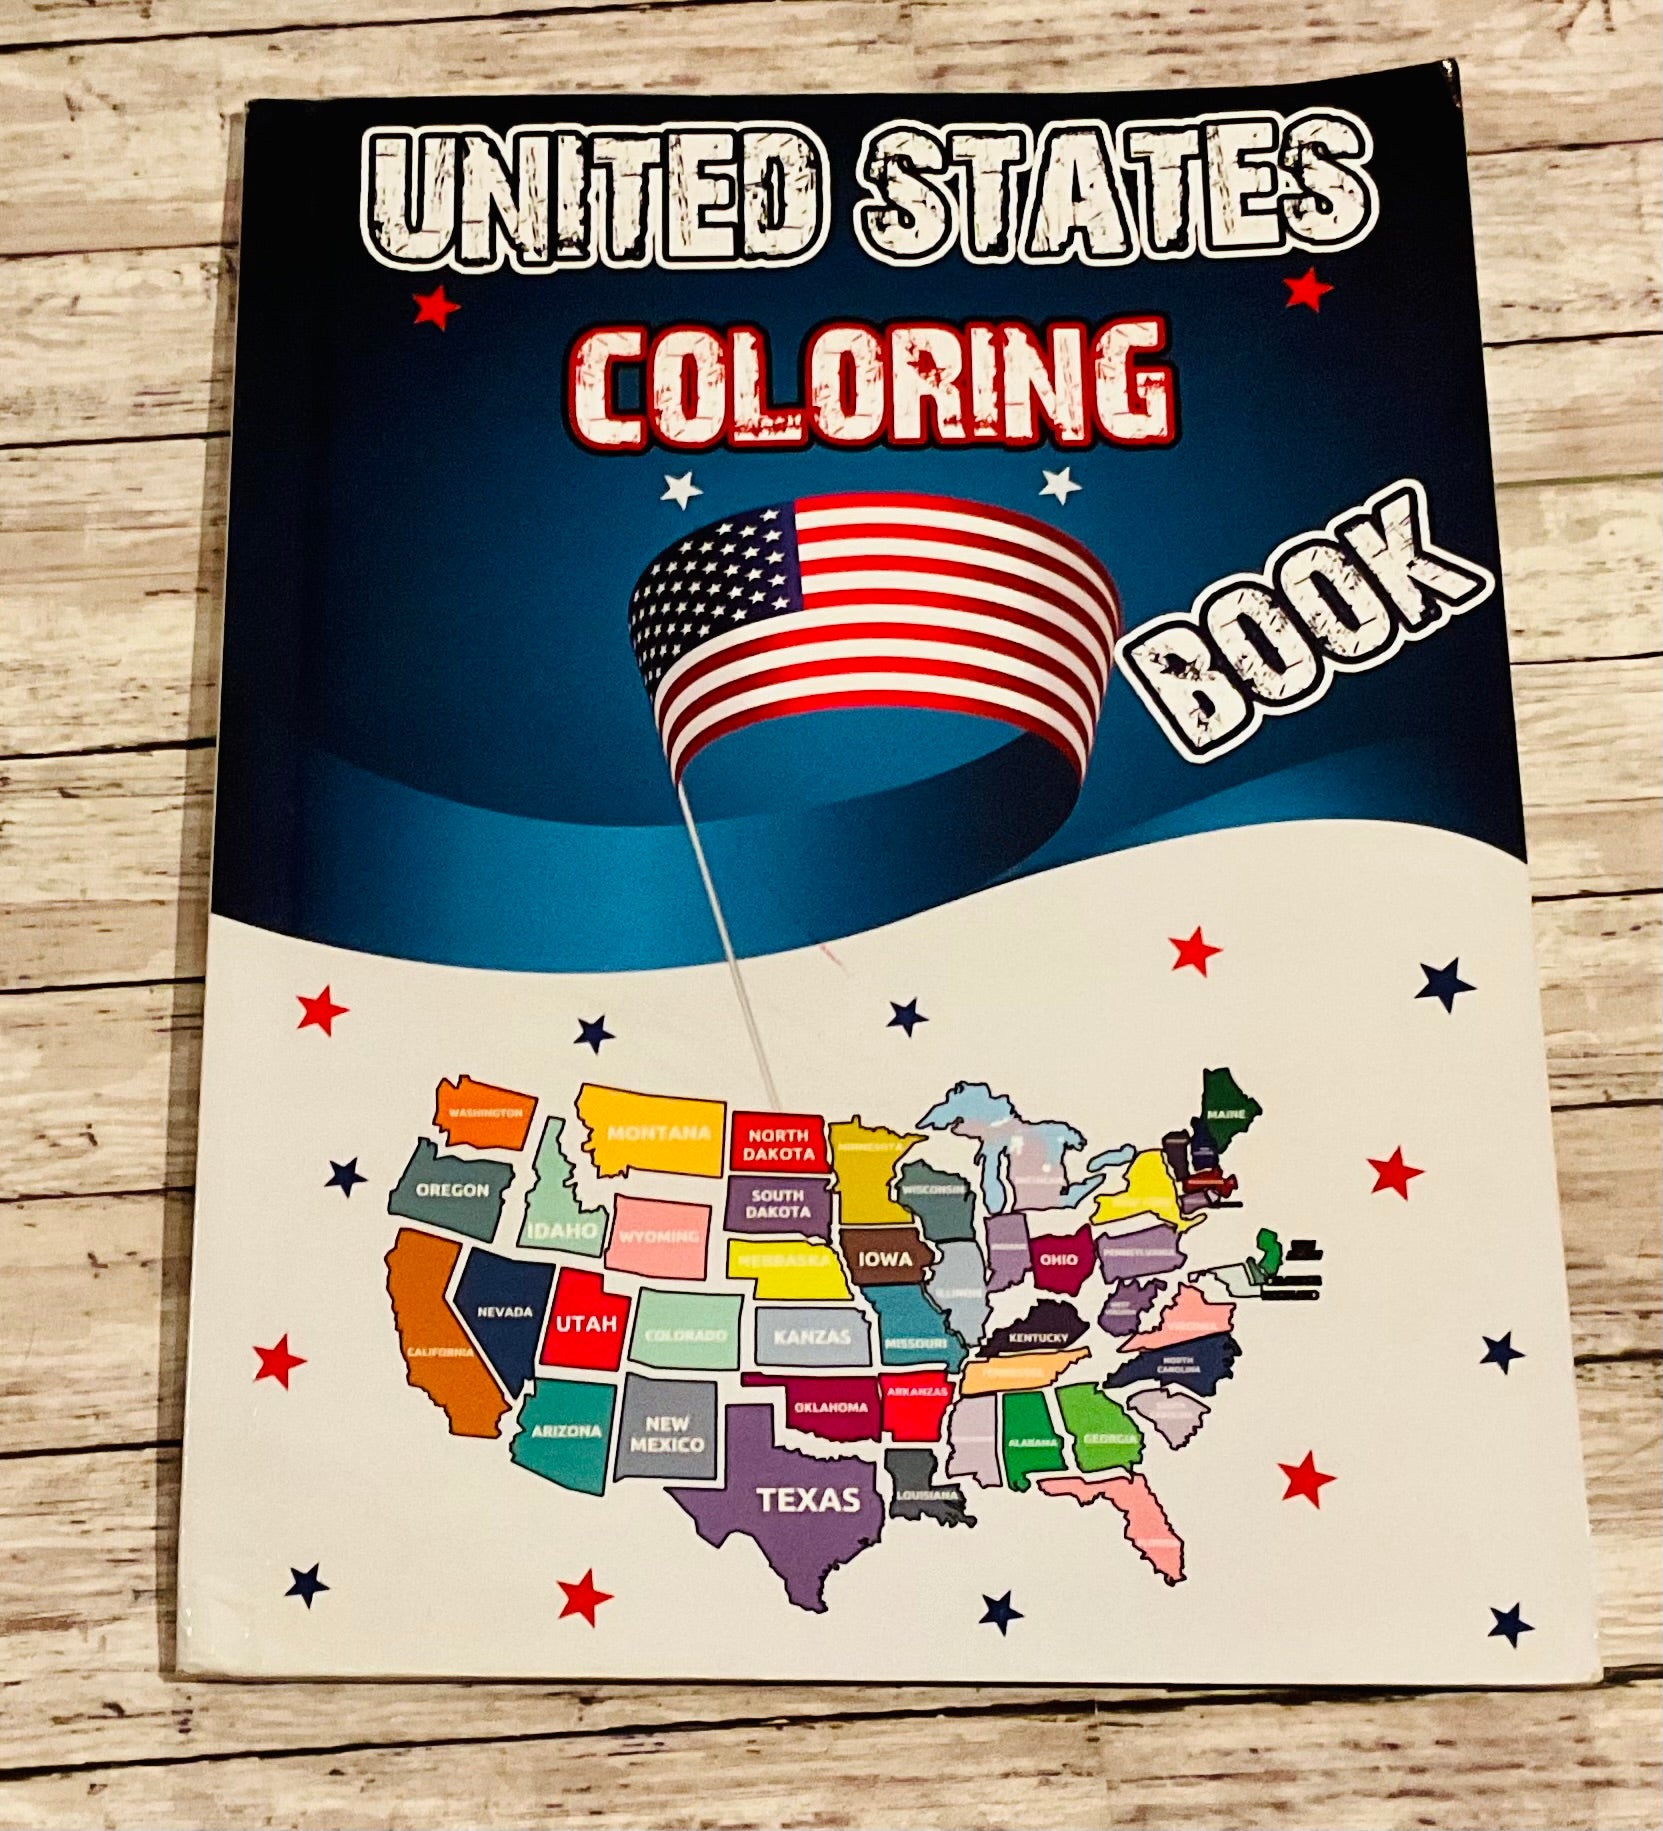 United States Coloring Book - Anchored Homeschool Resource Center